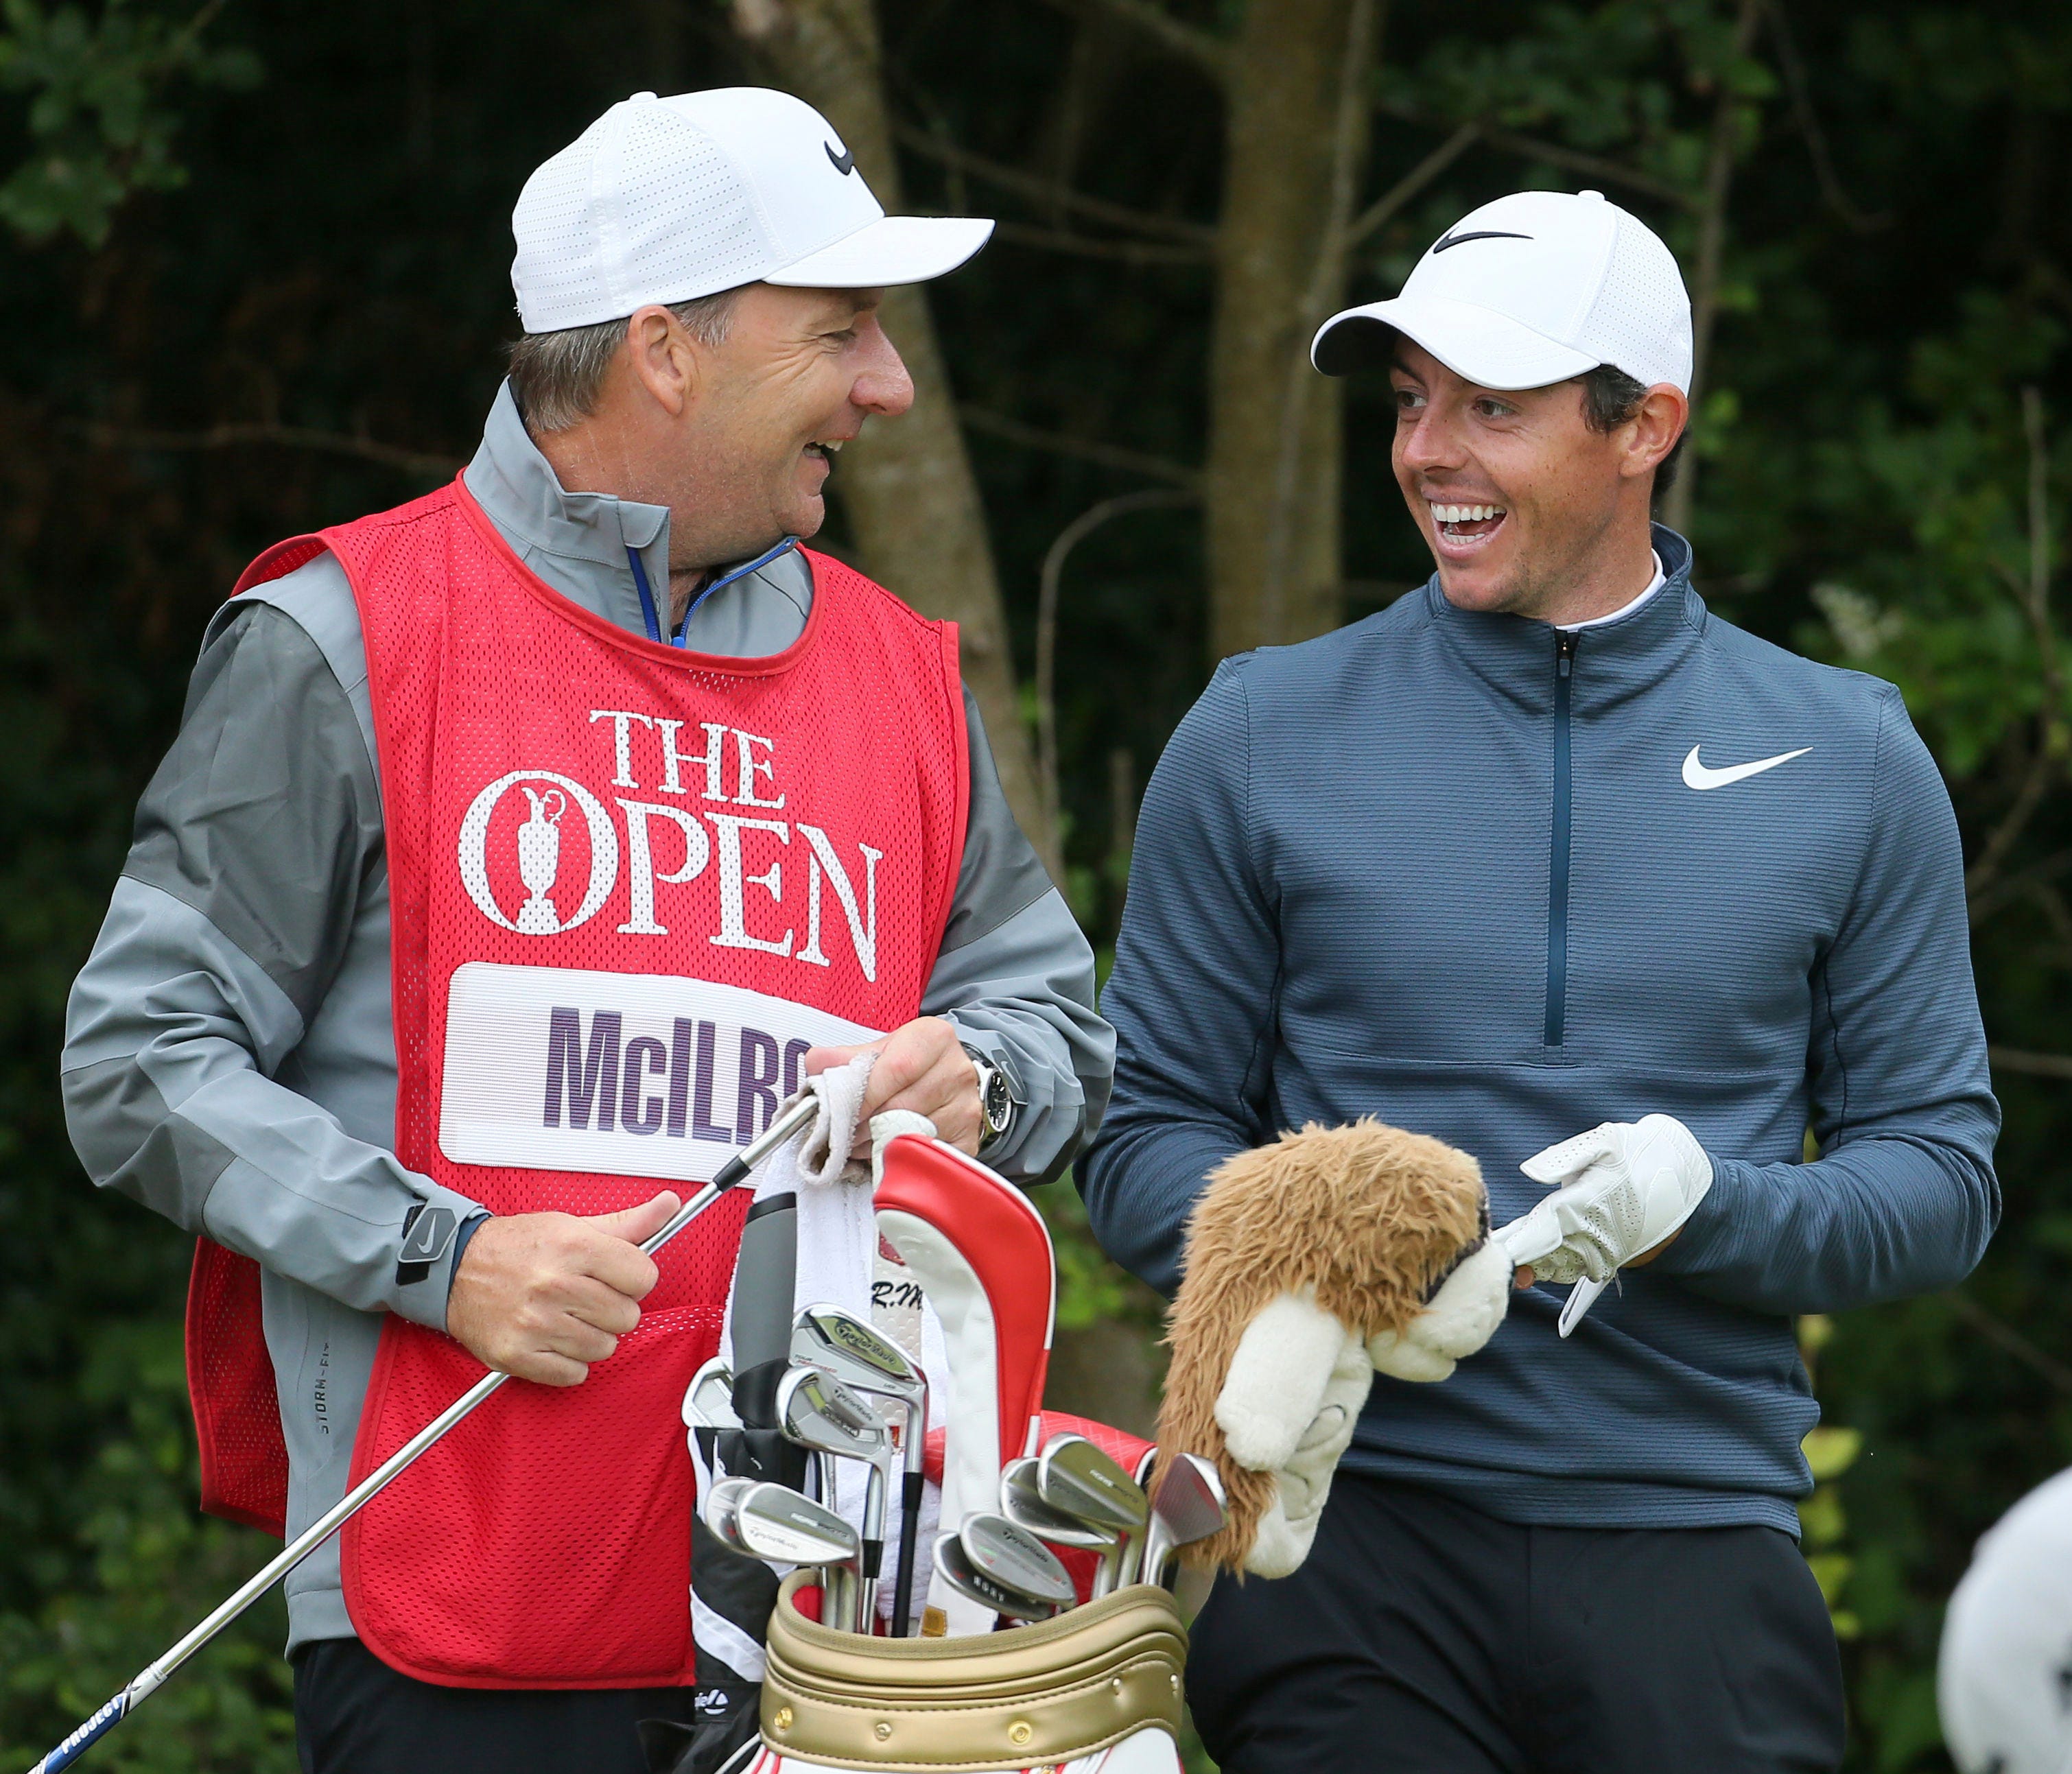 Northern Ireland's Rory McIlroy speaks with his caddie JP Fitzgerald during the second round of the British Open Golf Championship at Royal Birkdale,, Southport, Friday July 21, 2017. (Richard Sellers/PA via AP) ORG XMIT: TH807